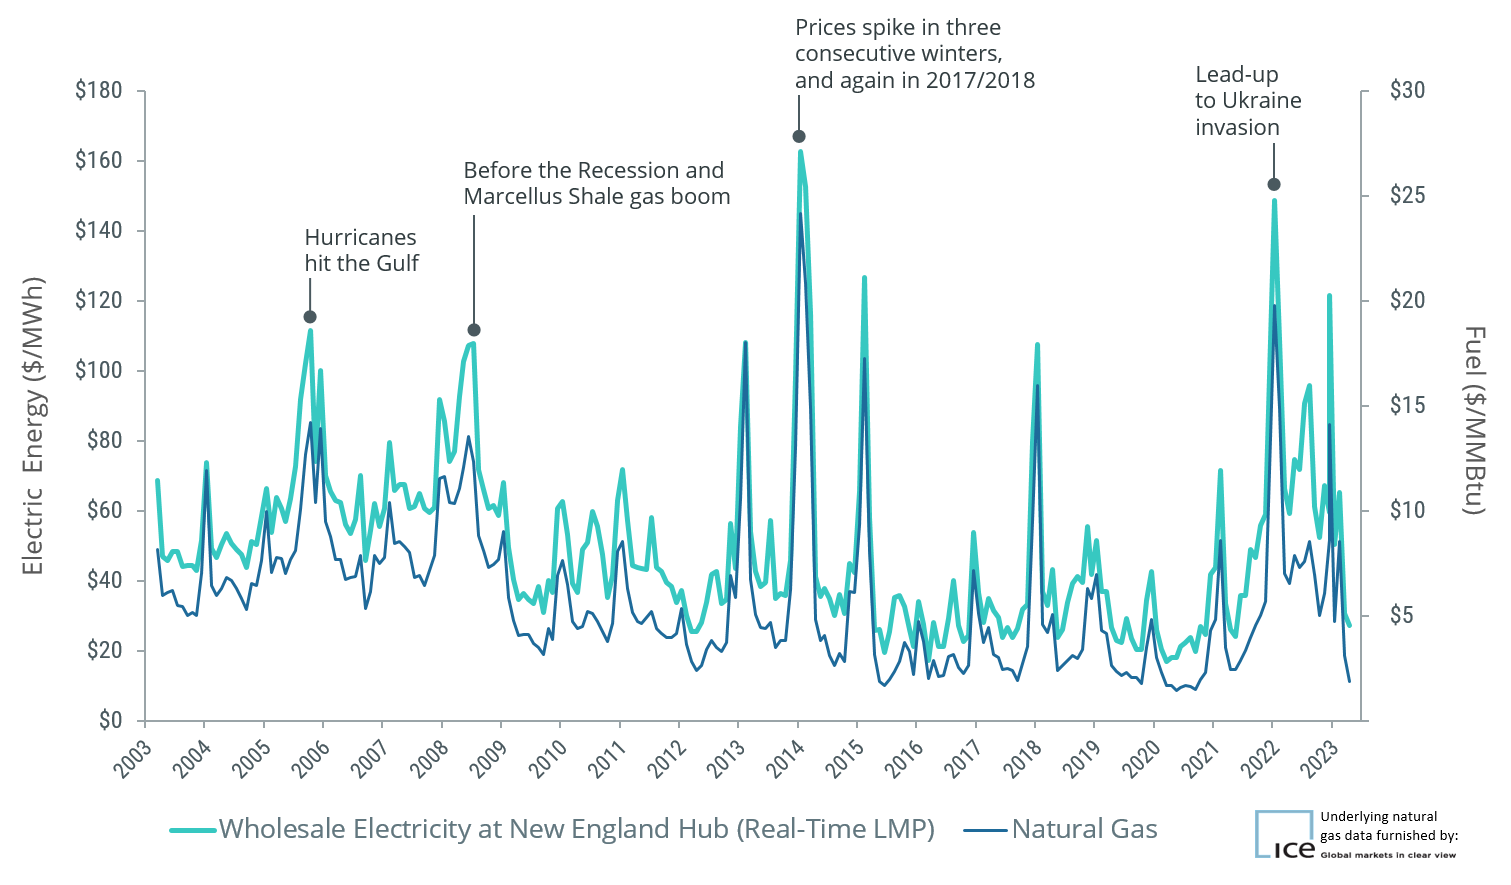 natural gas and wholesale electricity prices are linked